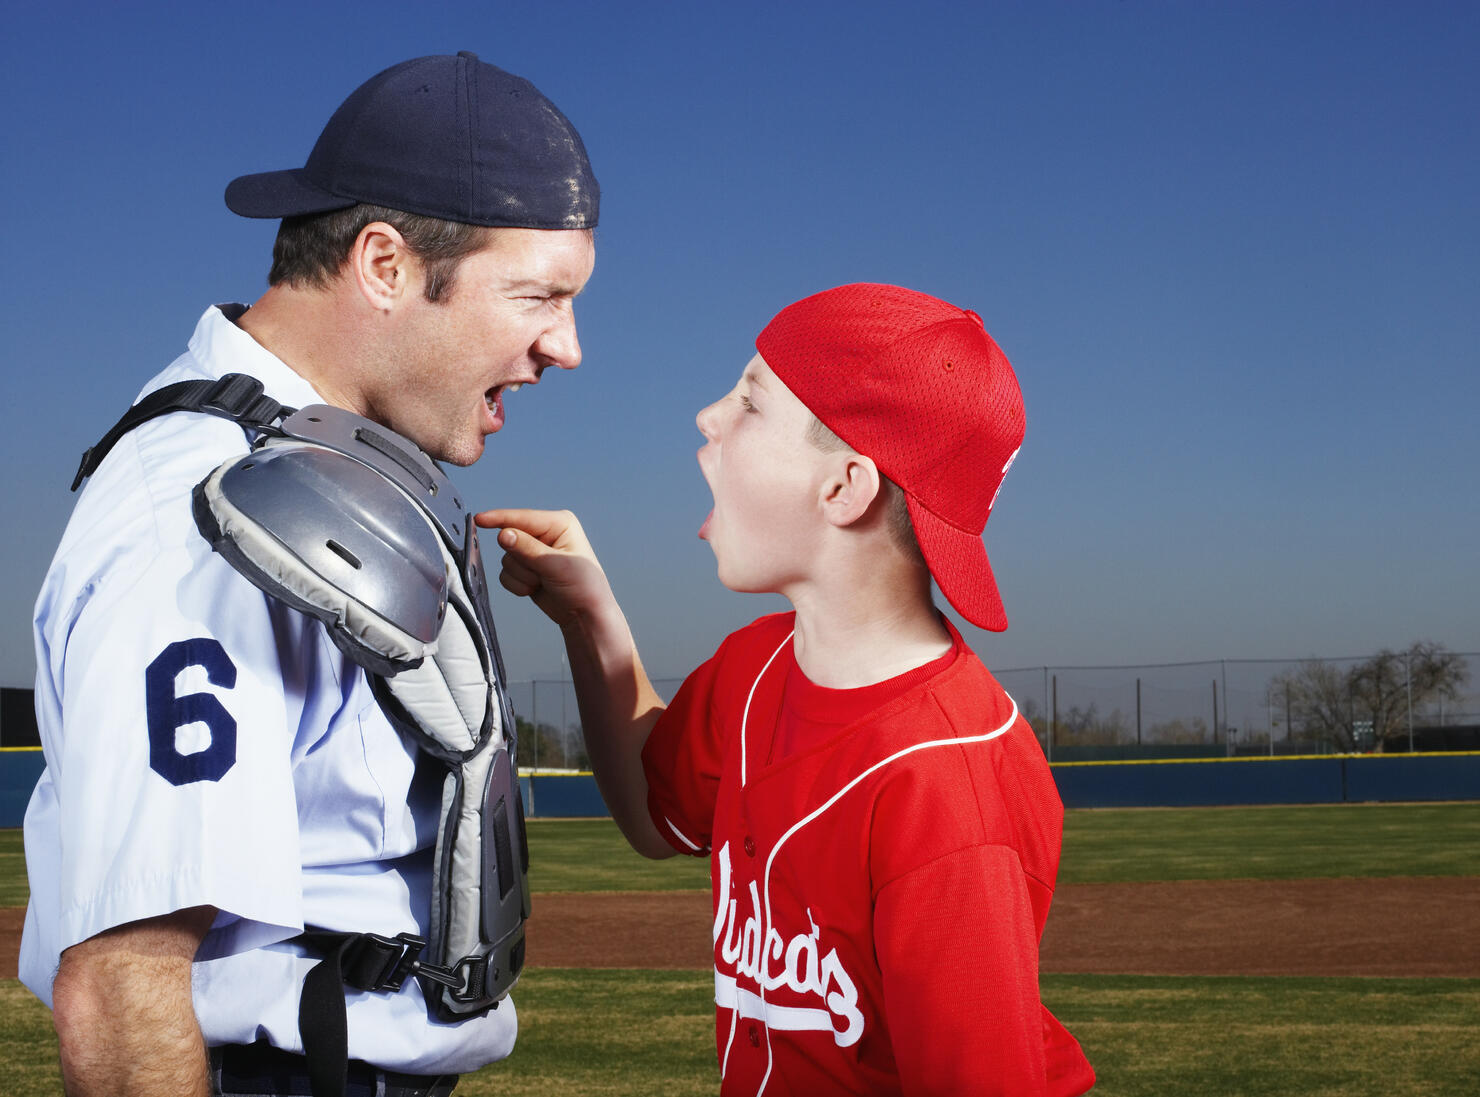 Young Baseball Player Arguing with Umpire